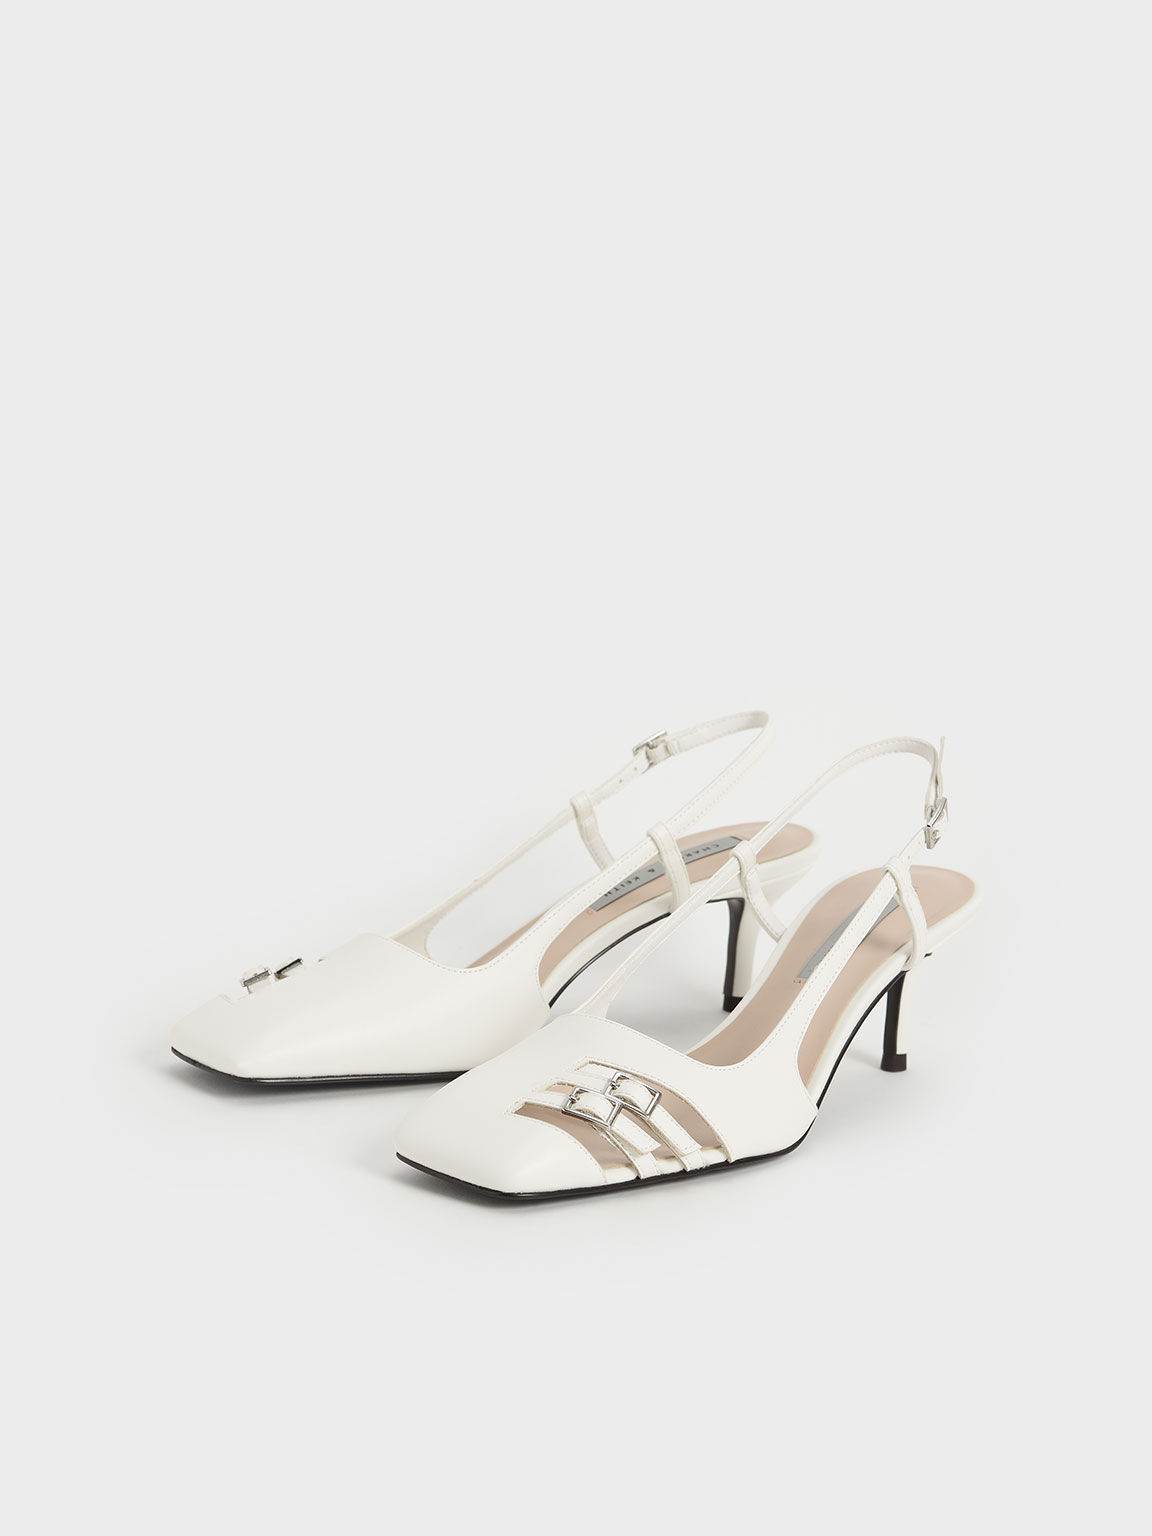 Cut-Out Buckled Slingback Pumps, White, hi-res